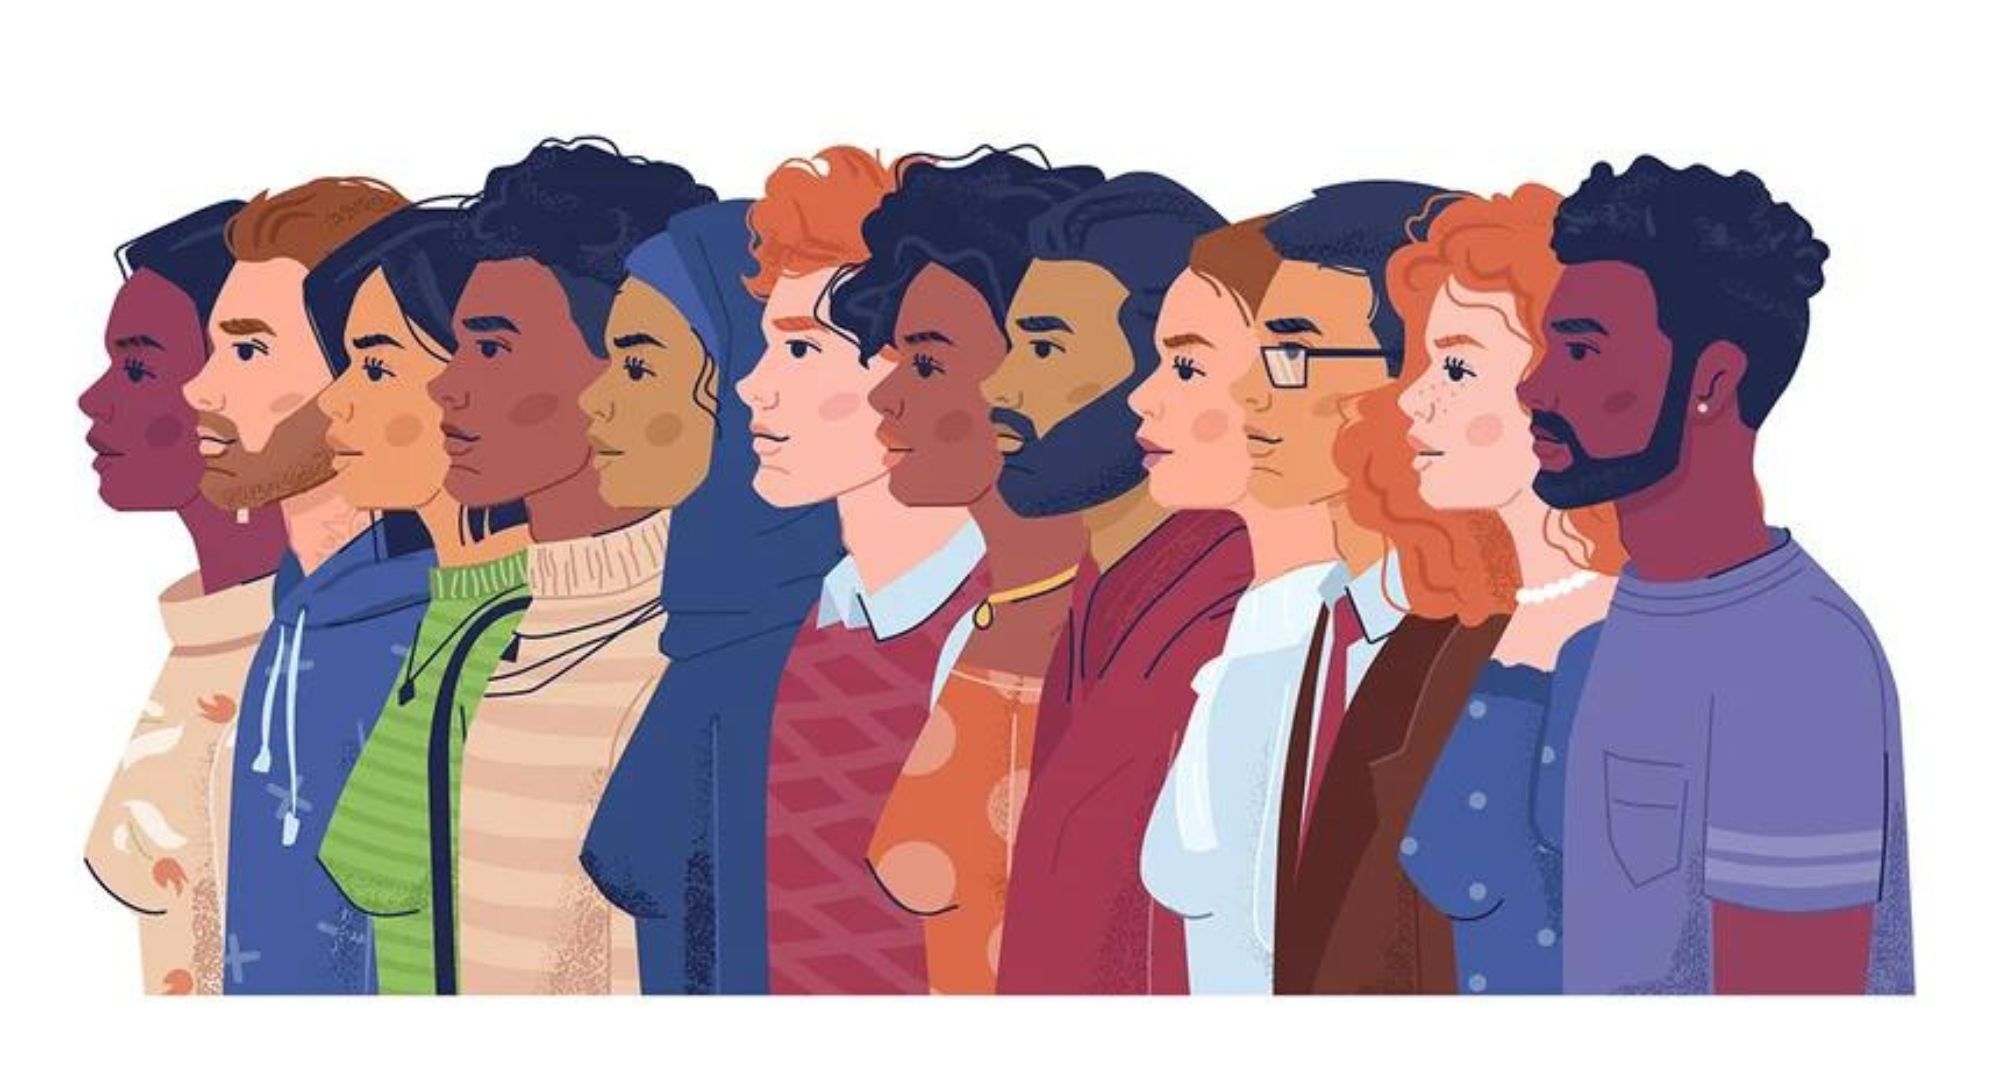 Image is of a drawing of diverse group of people representing diversity in the workplace.